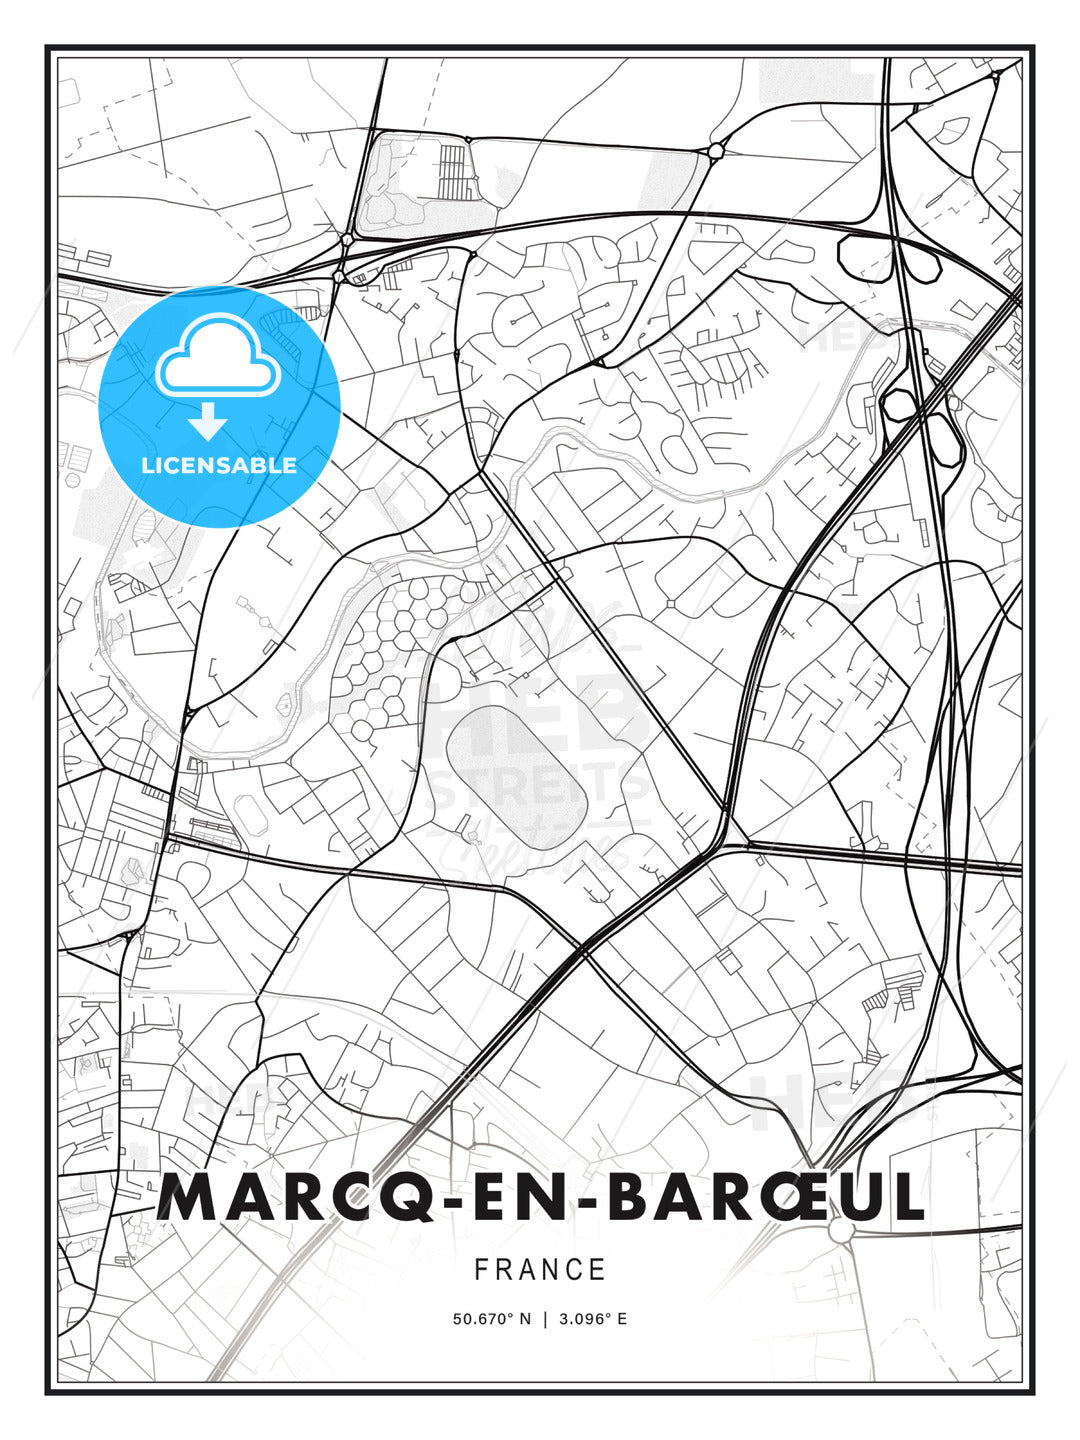 Marcq-en-Barœul, France, Modern Print Template in Various Formats - HEBSTREITS Sketches